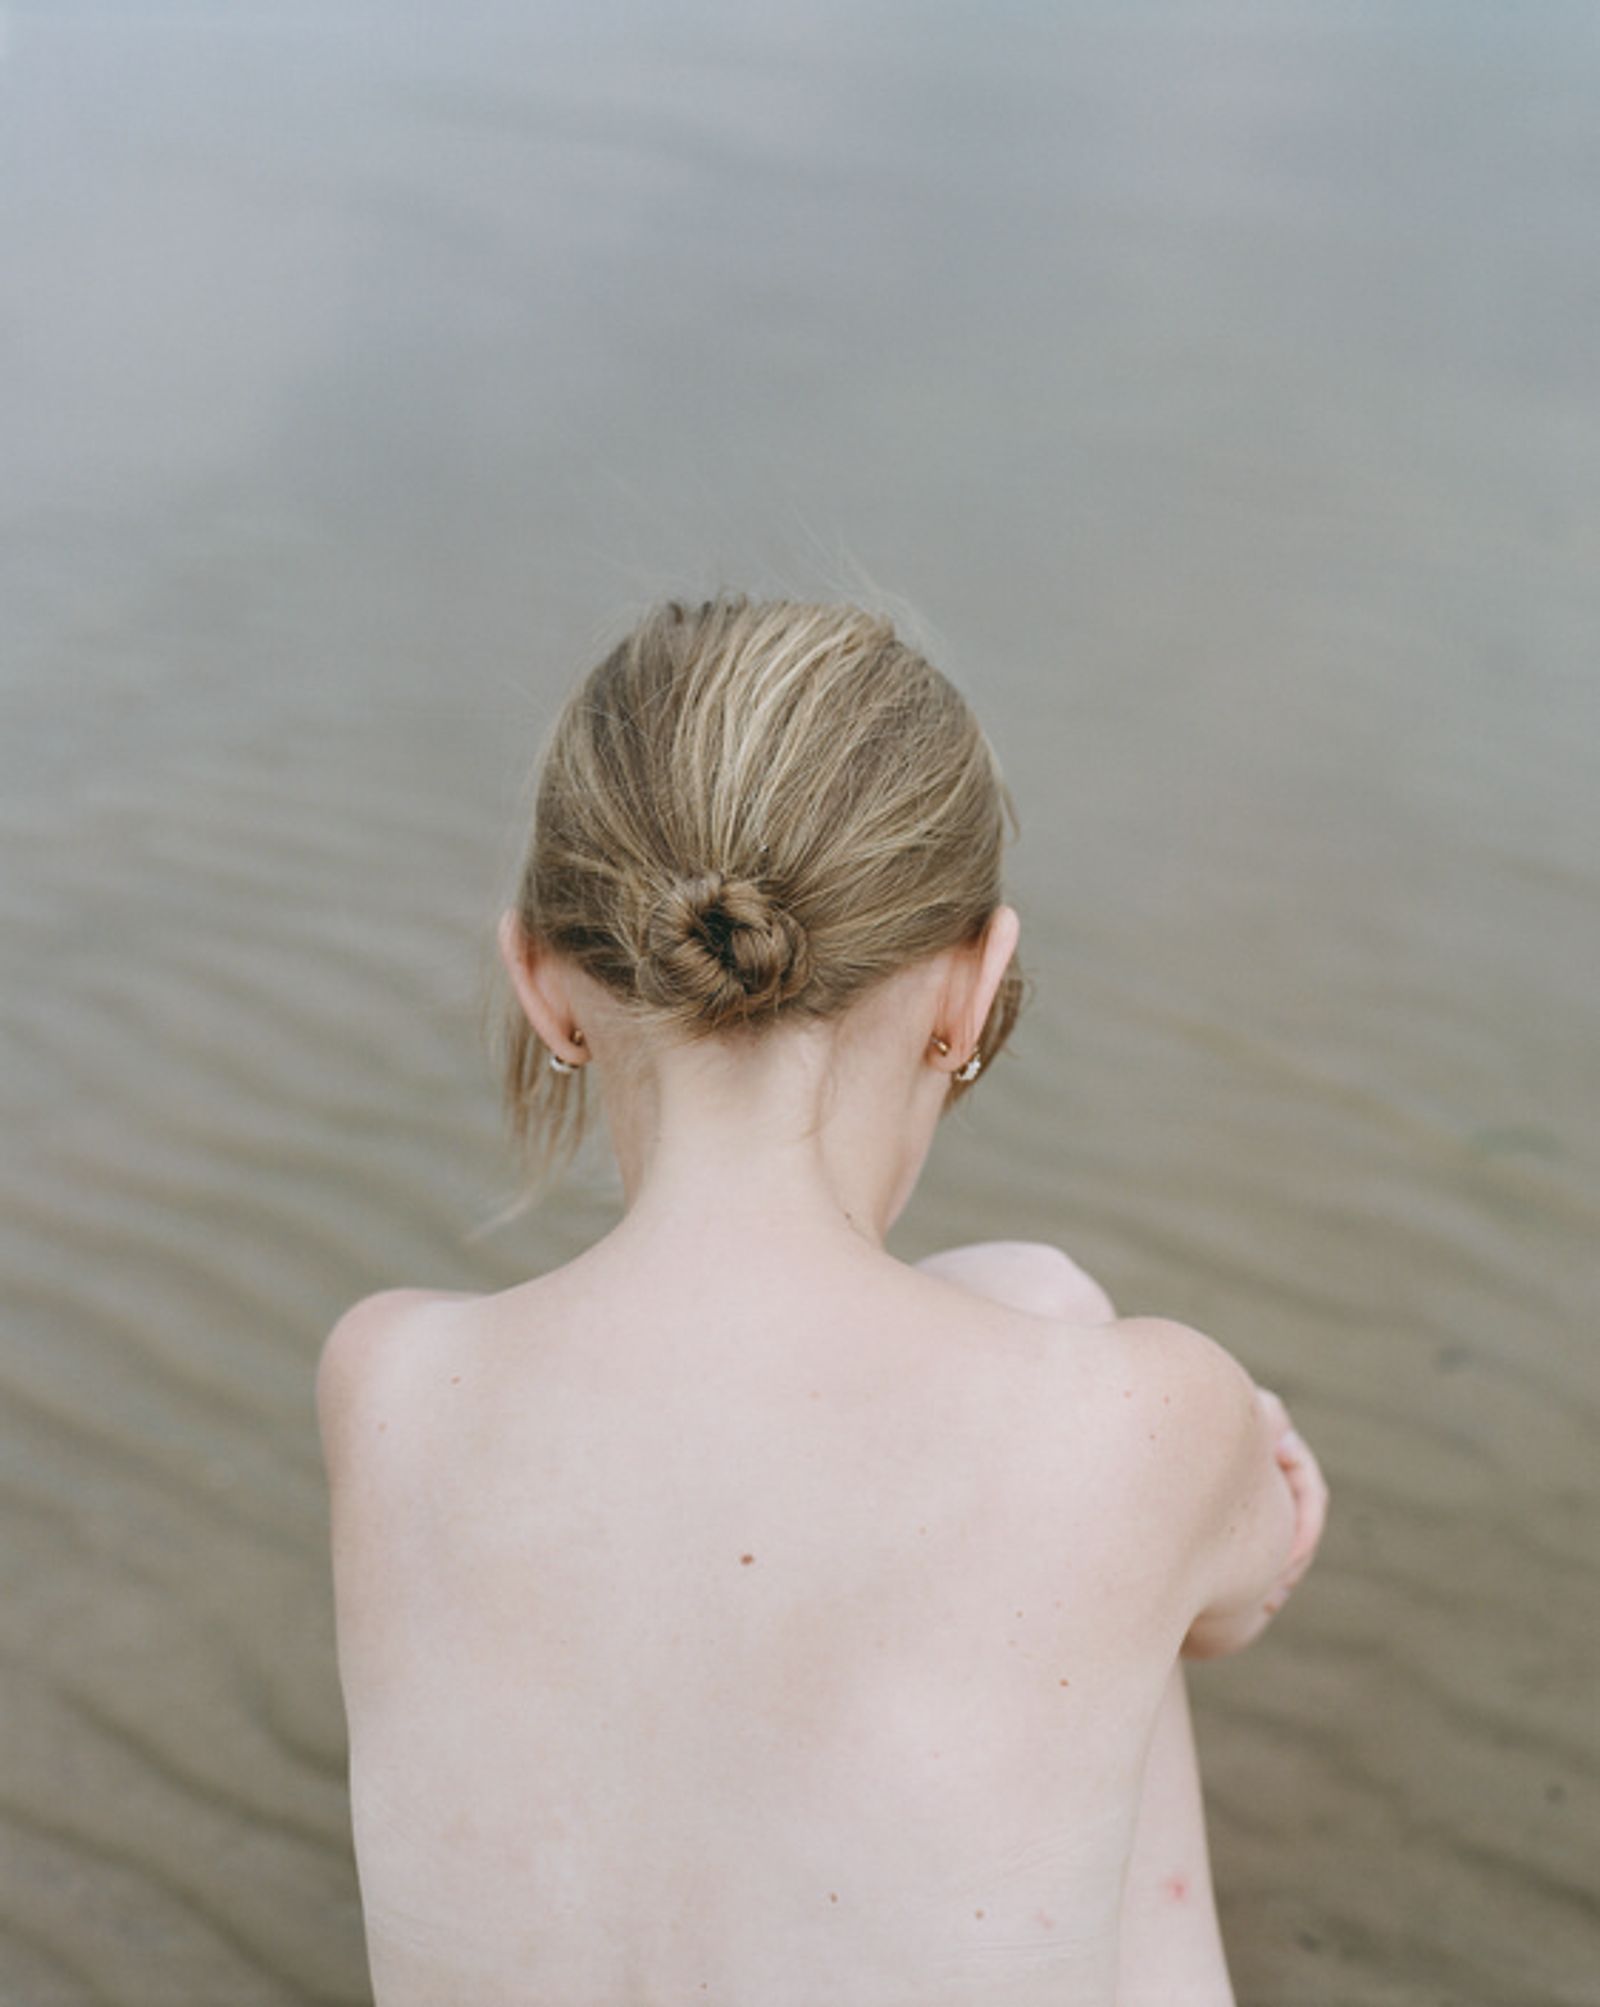 © Evita Goze - Image from the Anete photography project